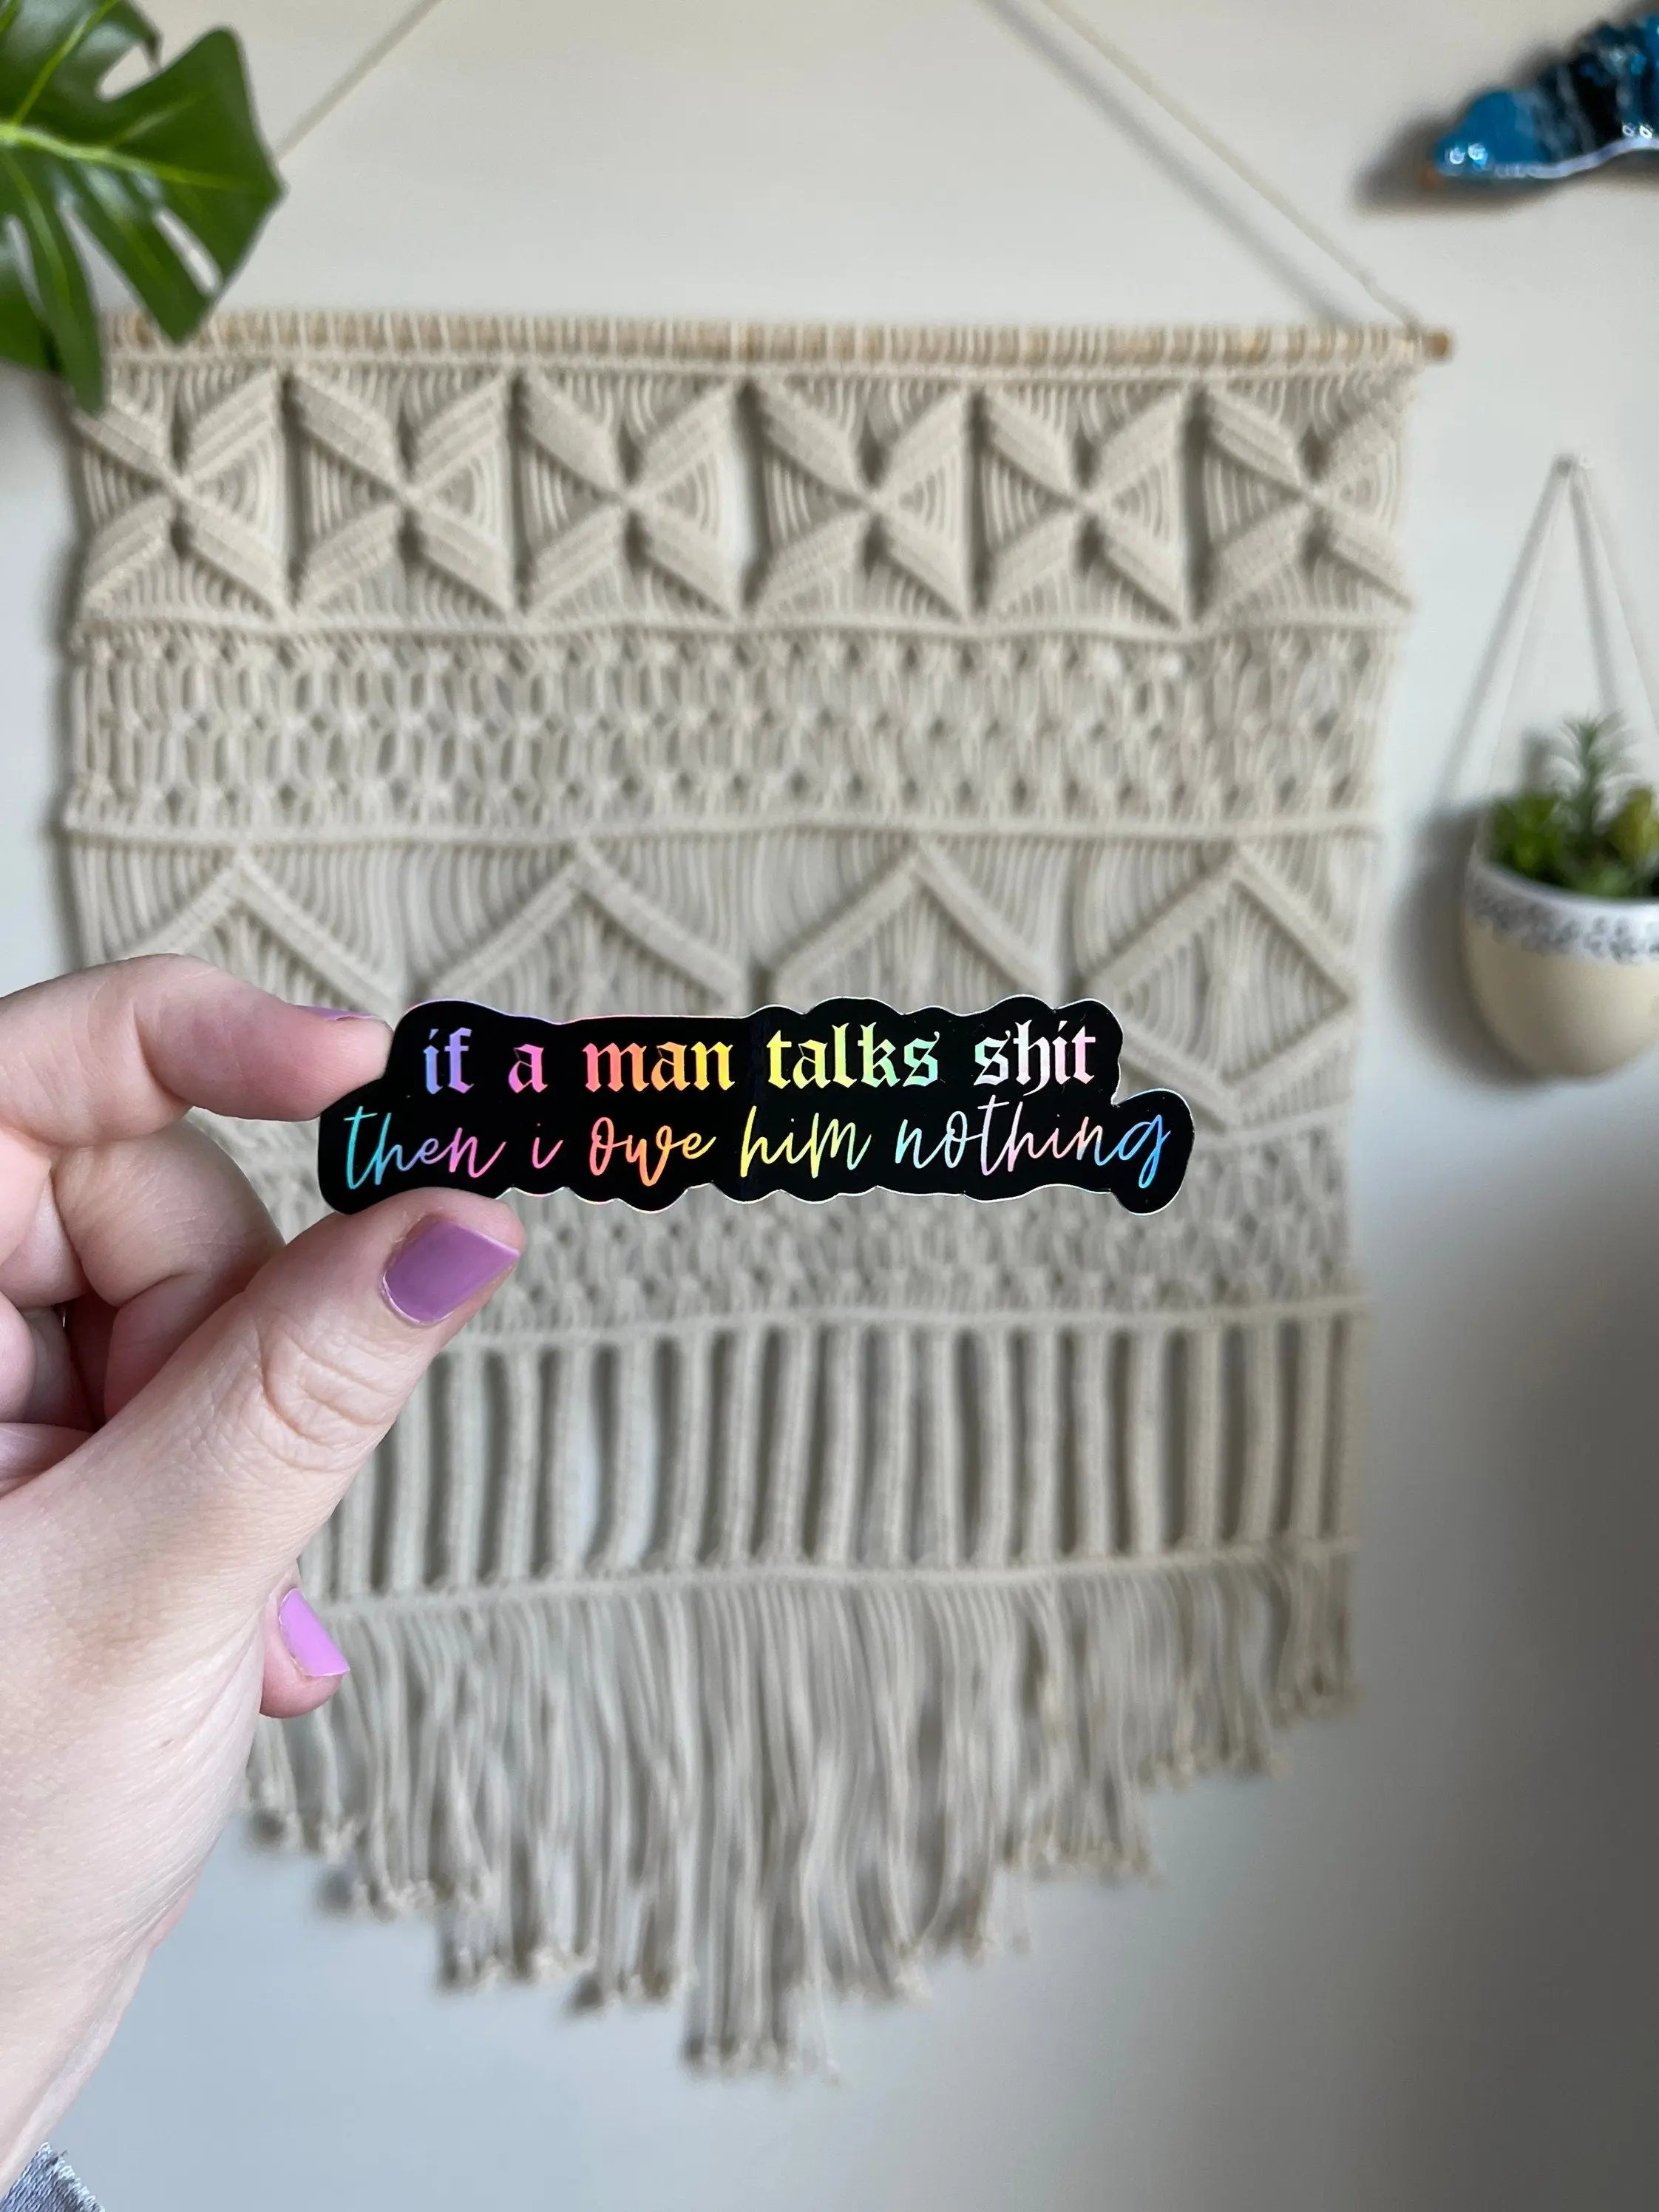 If a man talks shit then I owe him nothing holographic sticker MangoIllustrated